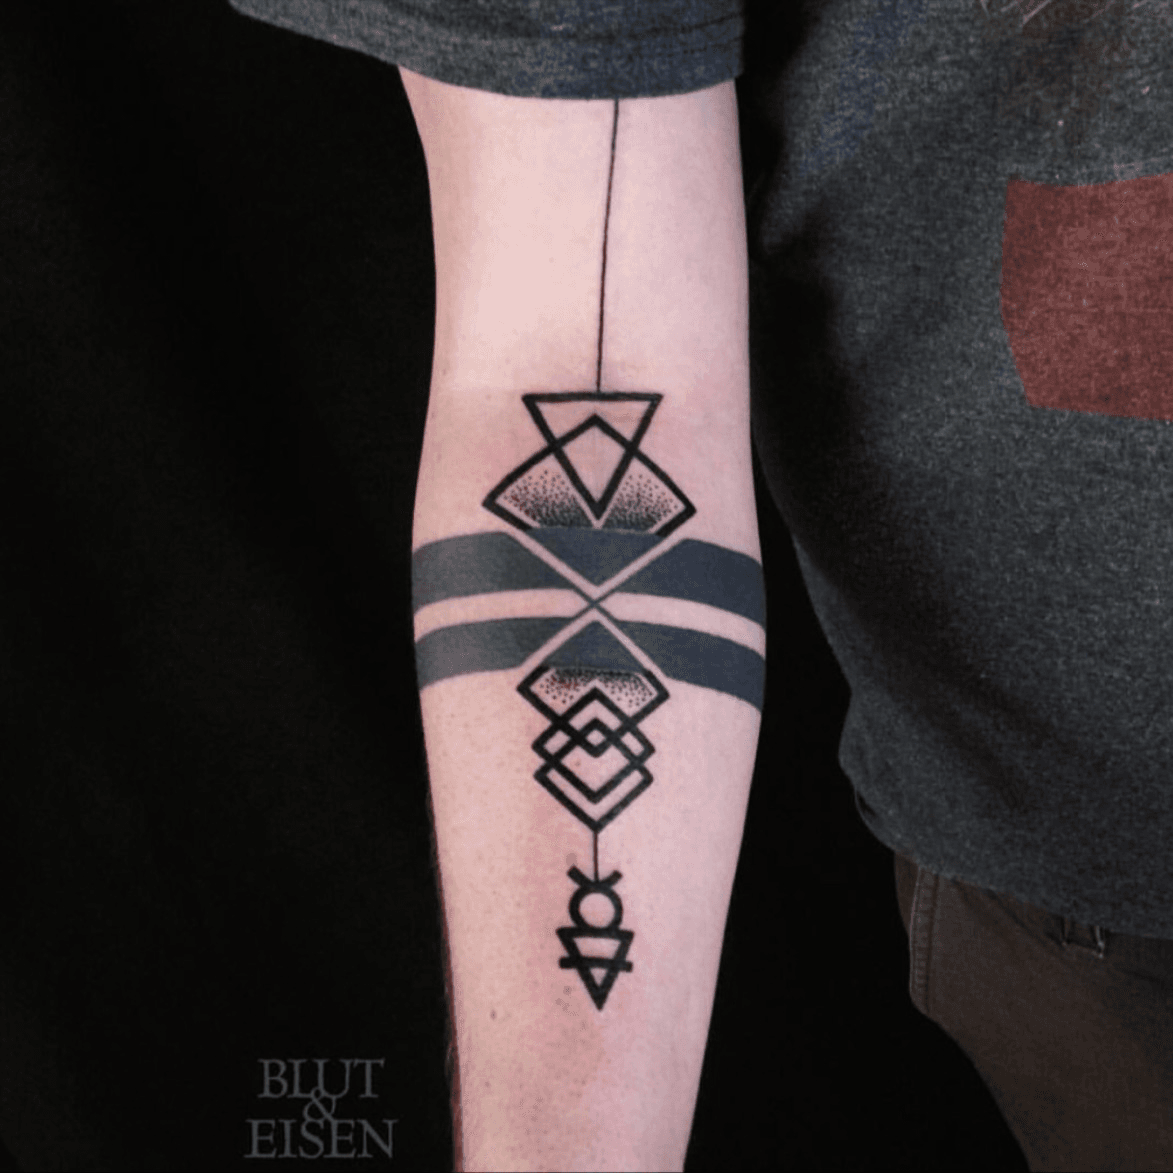 Tattoo  Piercing Studio  Mustre i Šare   Arm band  arrow tattoo Done  with OTM  Custom Tattoo Machines Done by Nazmir Vatres  httpswwwinstagramcommustreisare  httpswwwinstagramcomnazmirvatres  Facebook